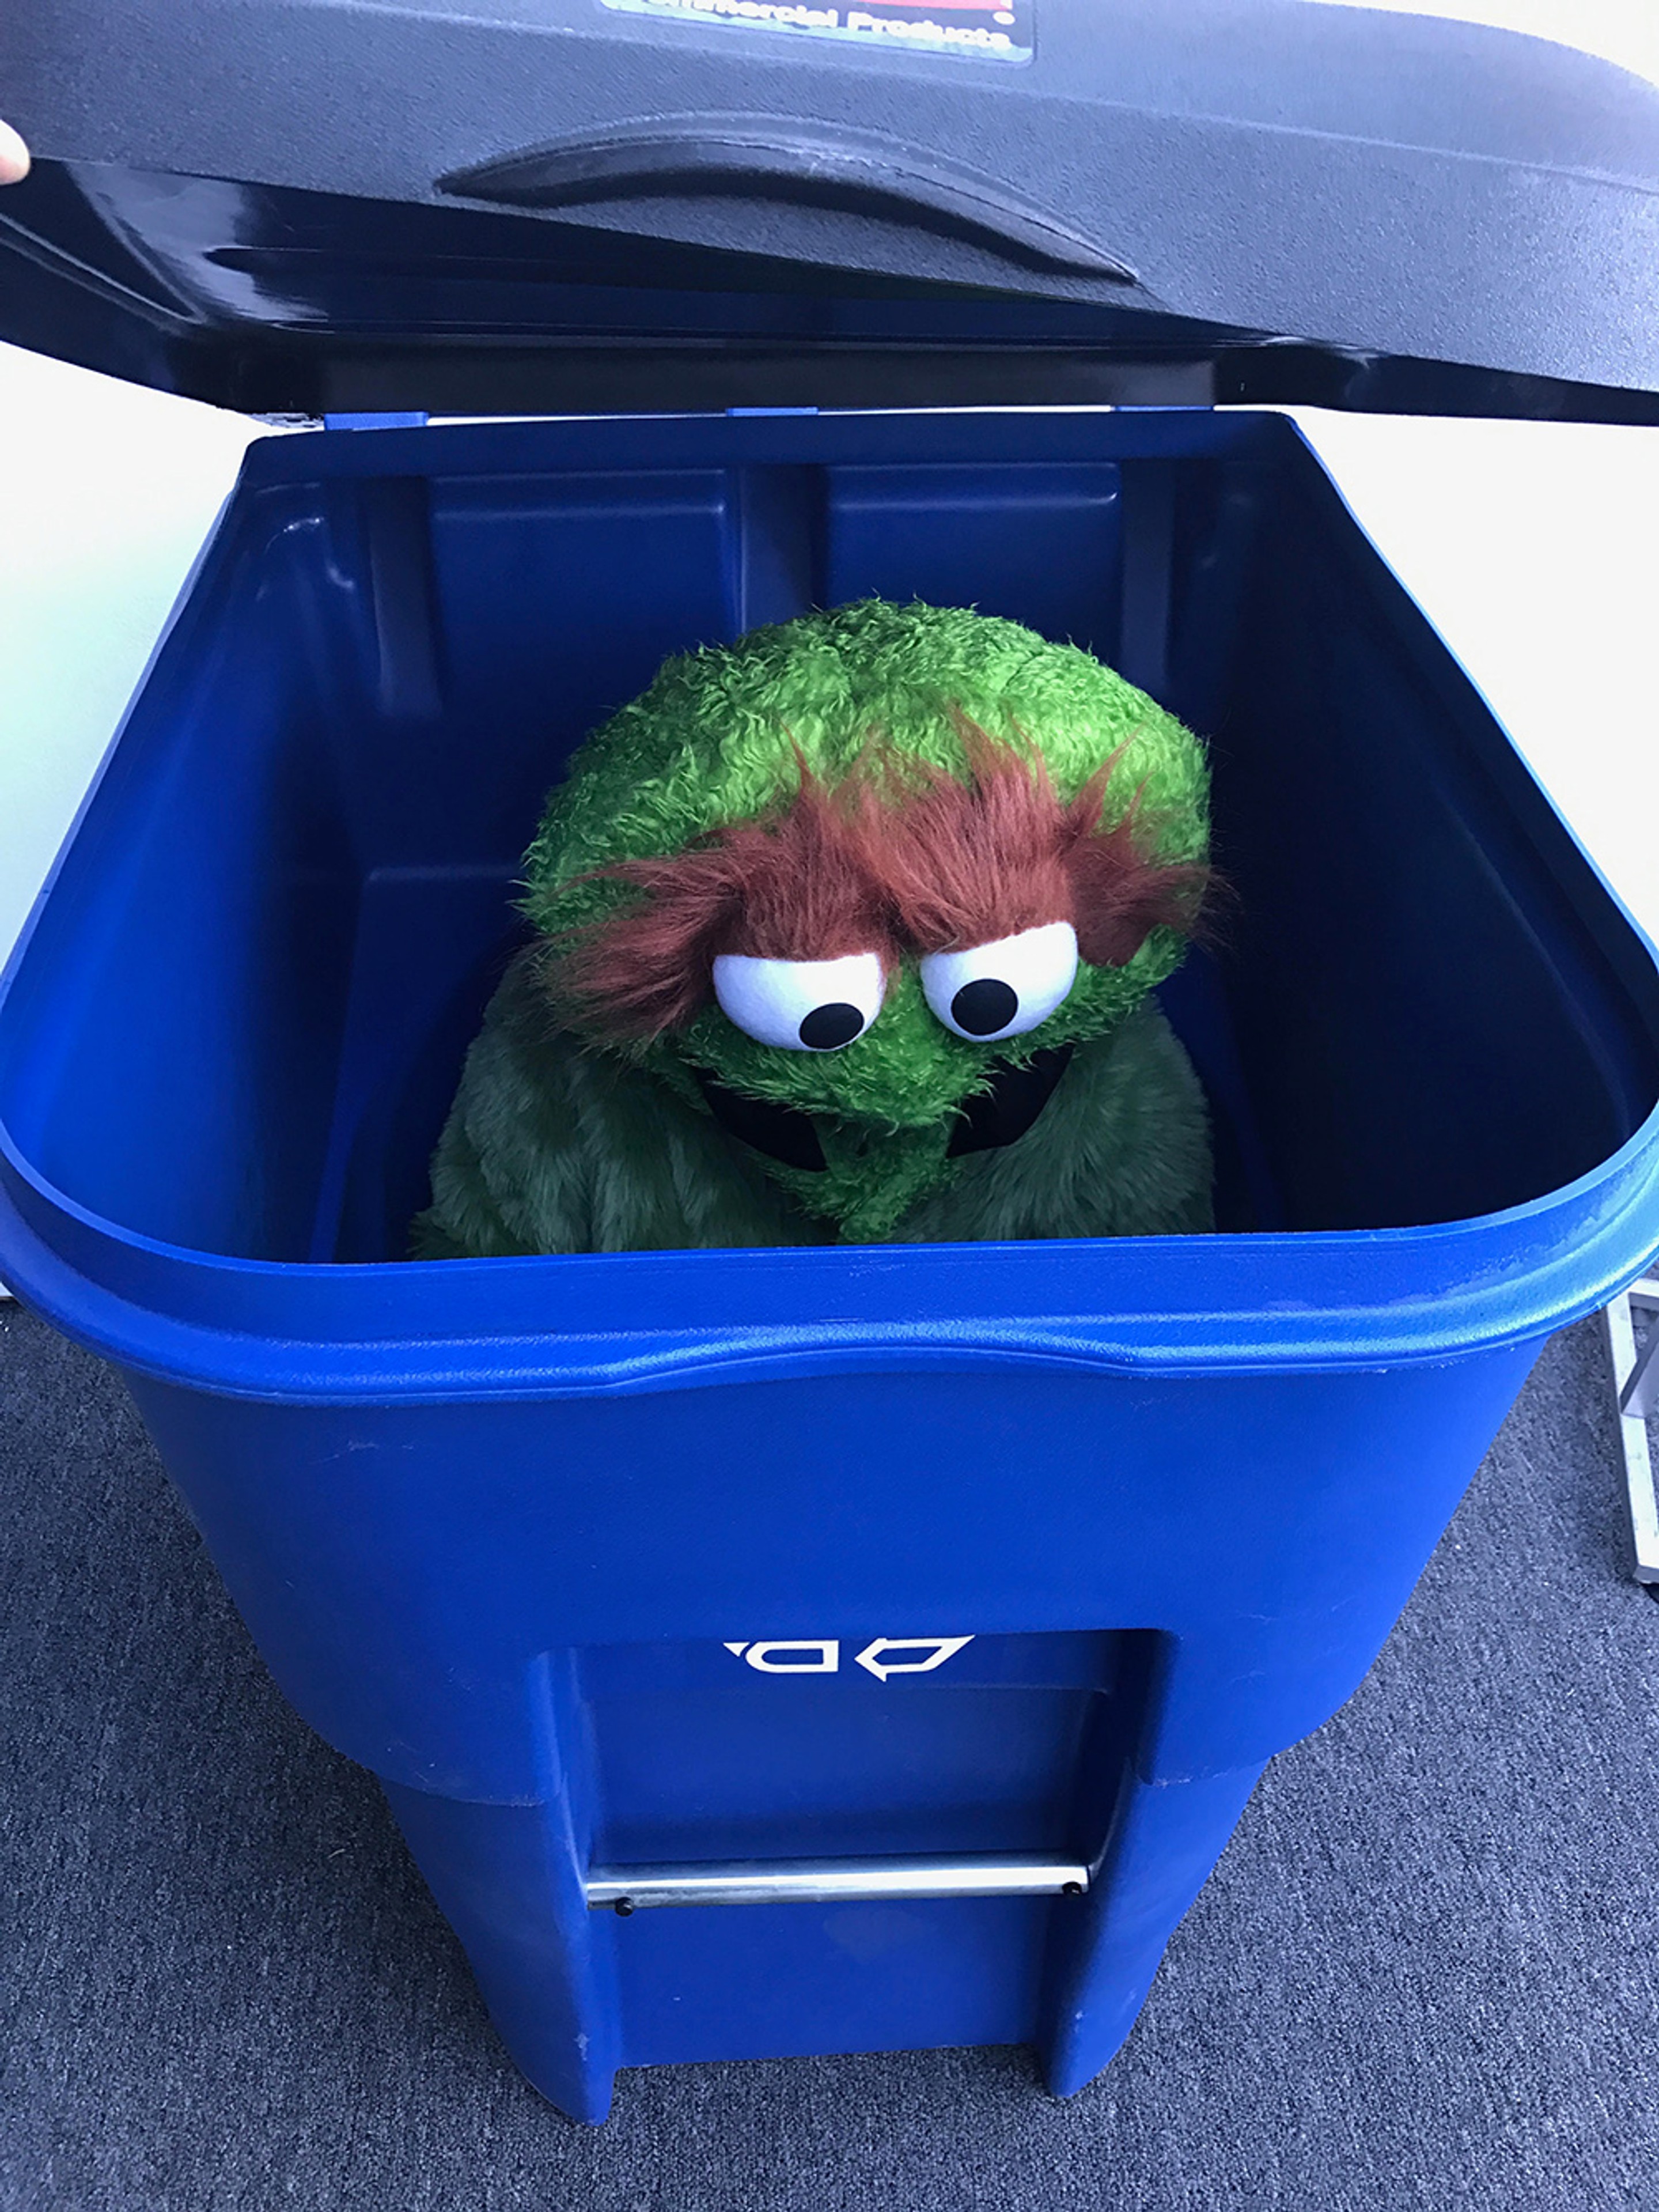 Oscar the Grouch (Green, Reference to Barry Johnston), 2017
Grouch costume, blue recycling bin, performer
Unique